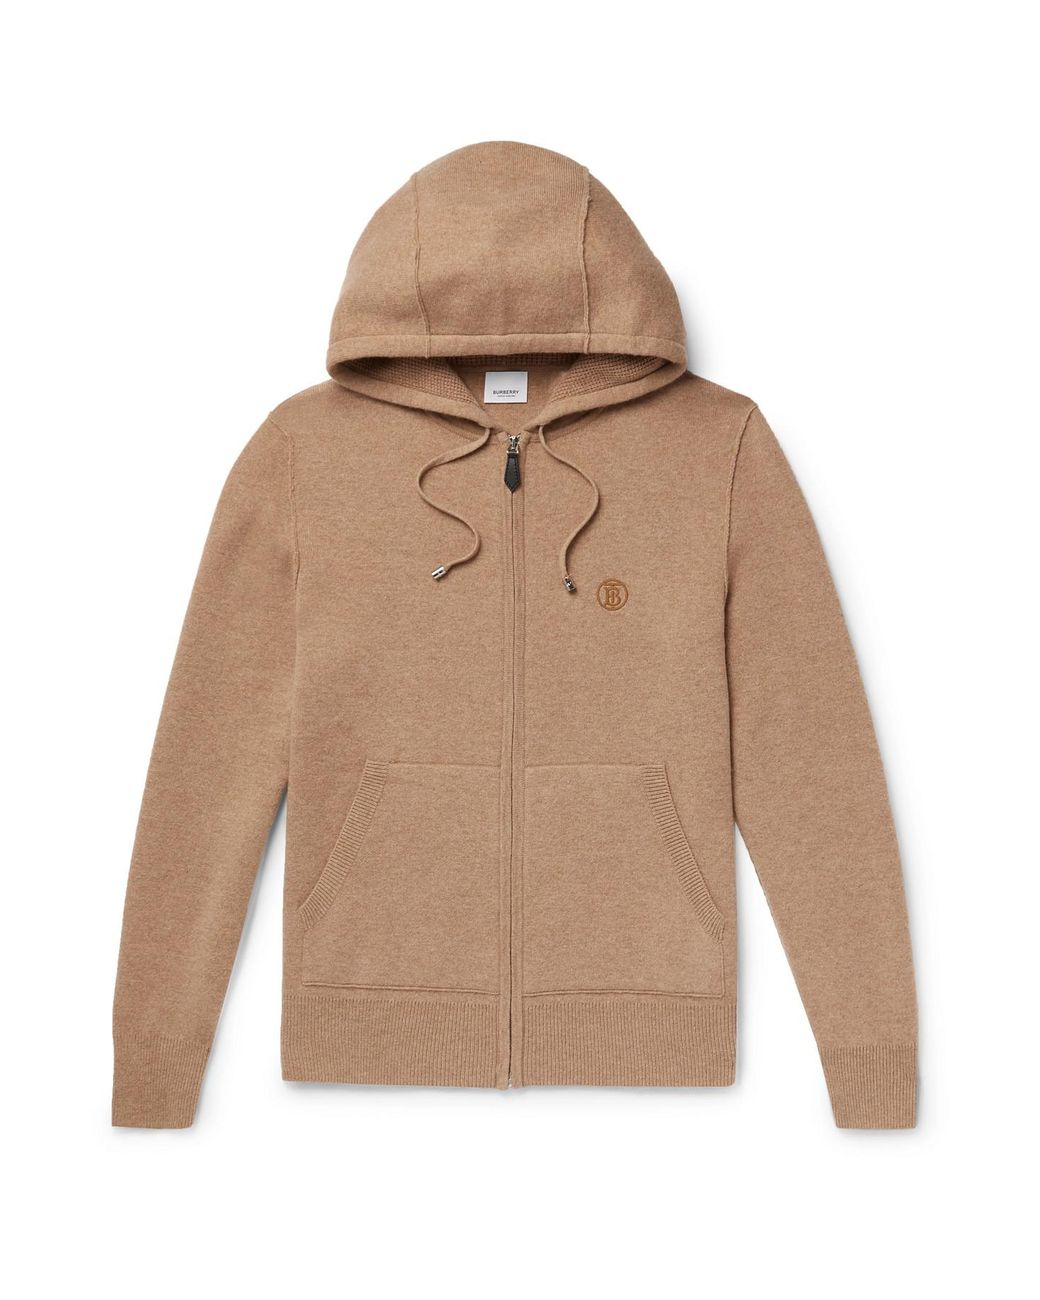 Burberry Cashmere-blend Zip-up Hoodie in Brown for Men - Lyst